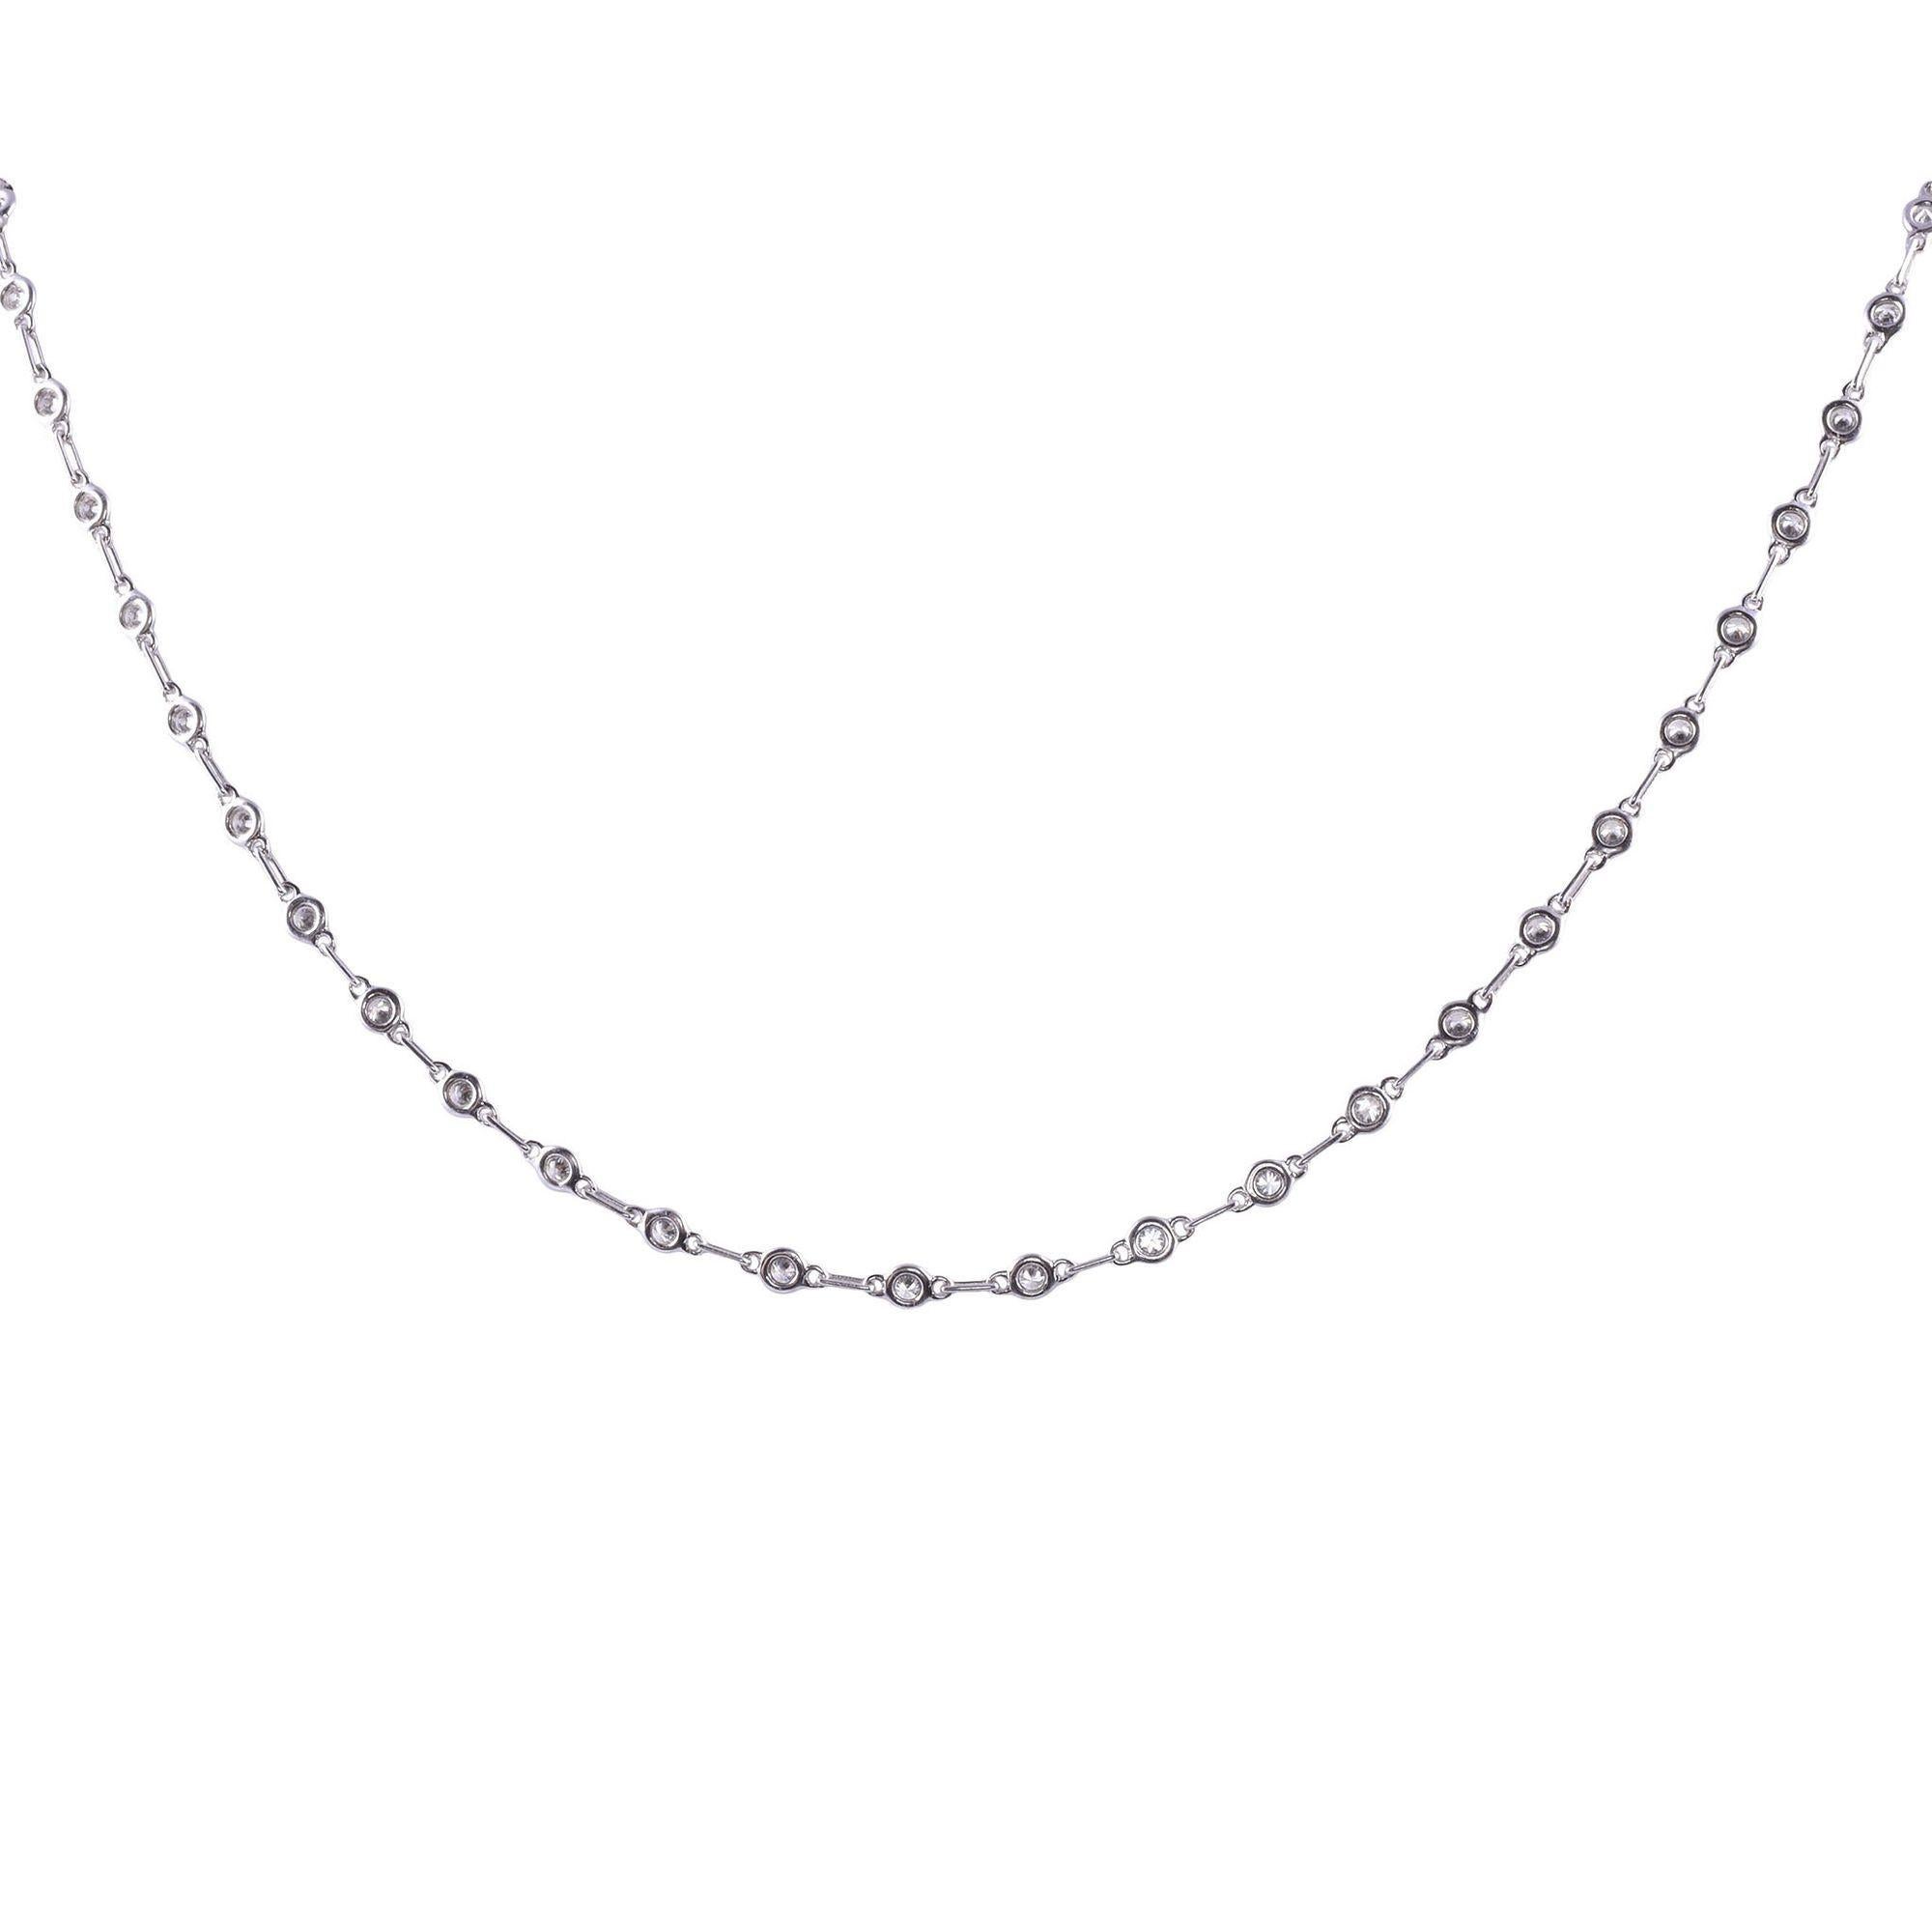 Estate 18K bezel diamond necklace. This estate diamond necklace is crafted in 18 karat gold and features 51 full cut diamonds at 2.40 carat total weight. The diamonds have VS1-2 clarity, with a few SI, and G-H color. This diamond necklace is in